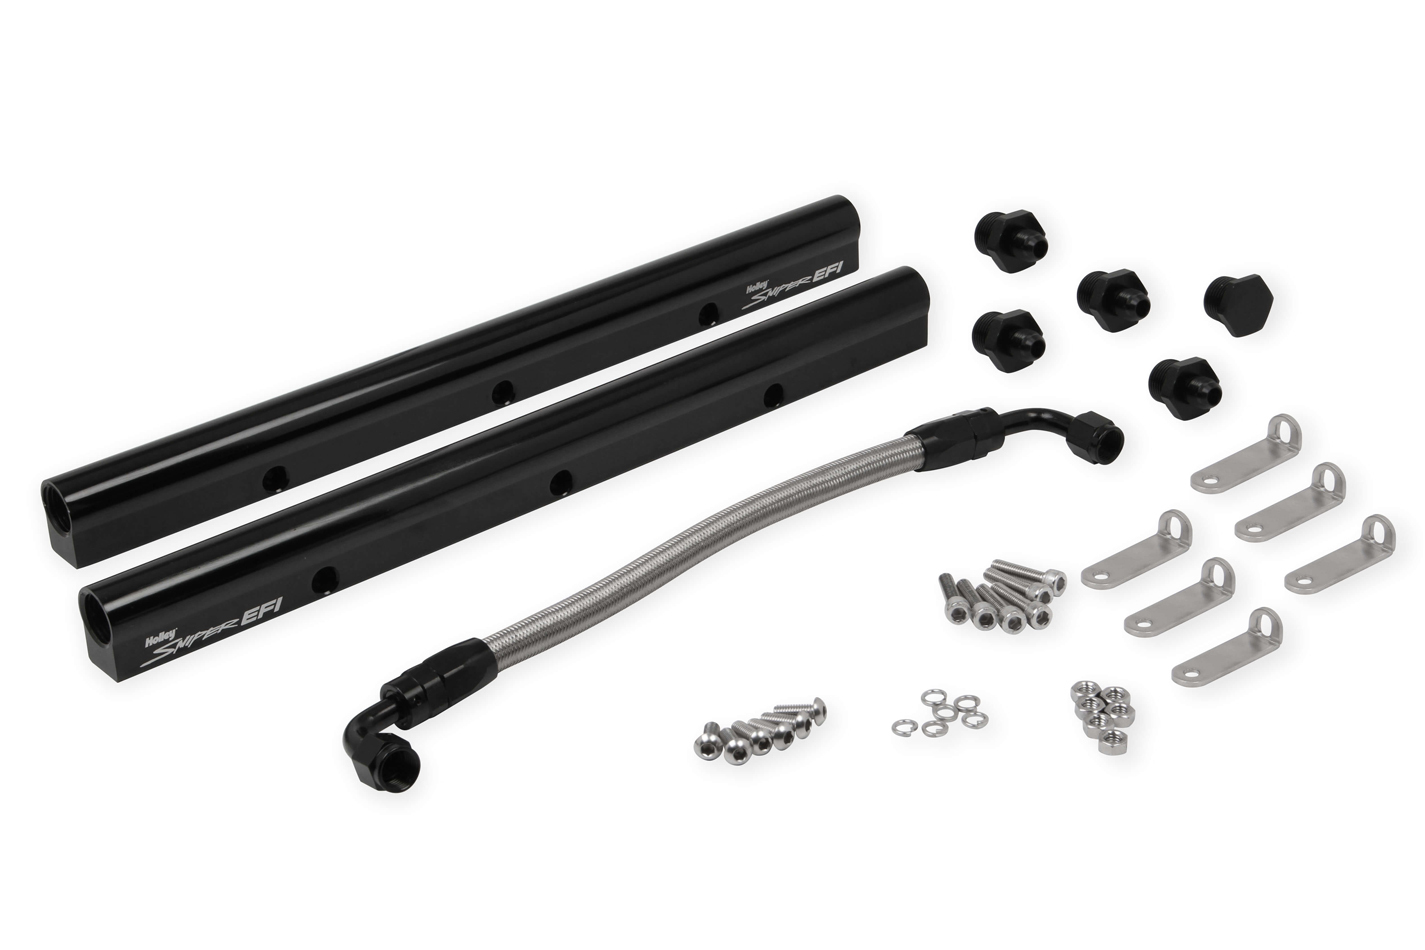 Holley 850005 Fuel Rail, Complete, Brackets / Fittings / Lines, Aluminum, Black Anodized, GM LS-Series, Kit